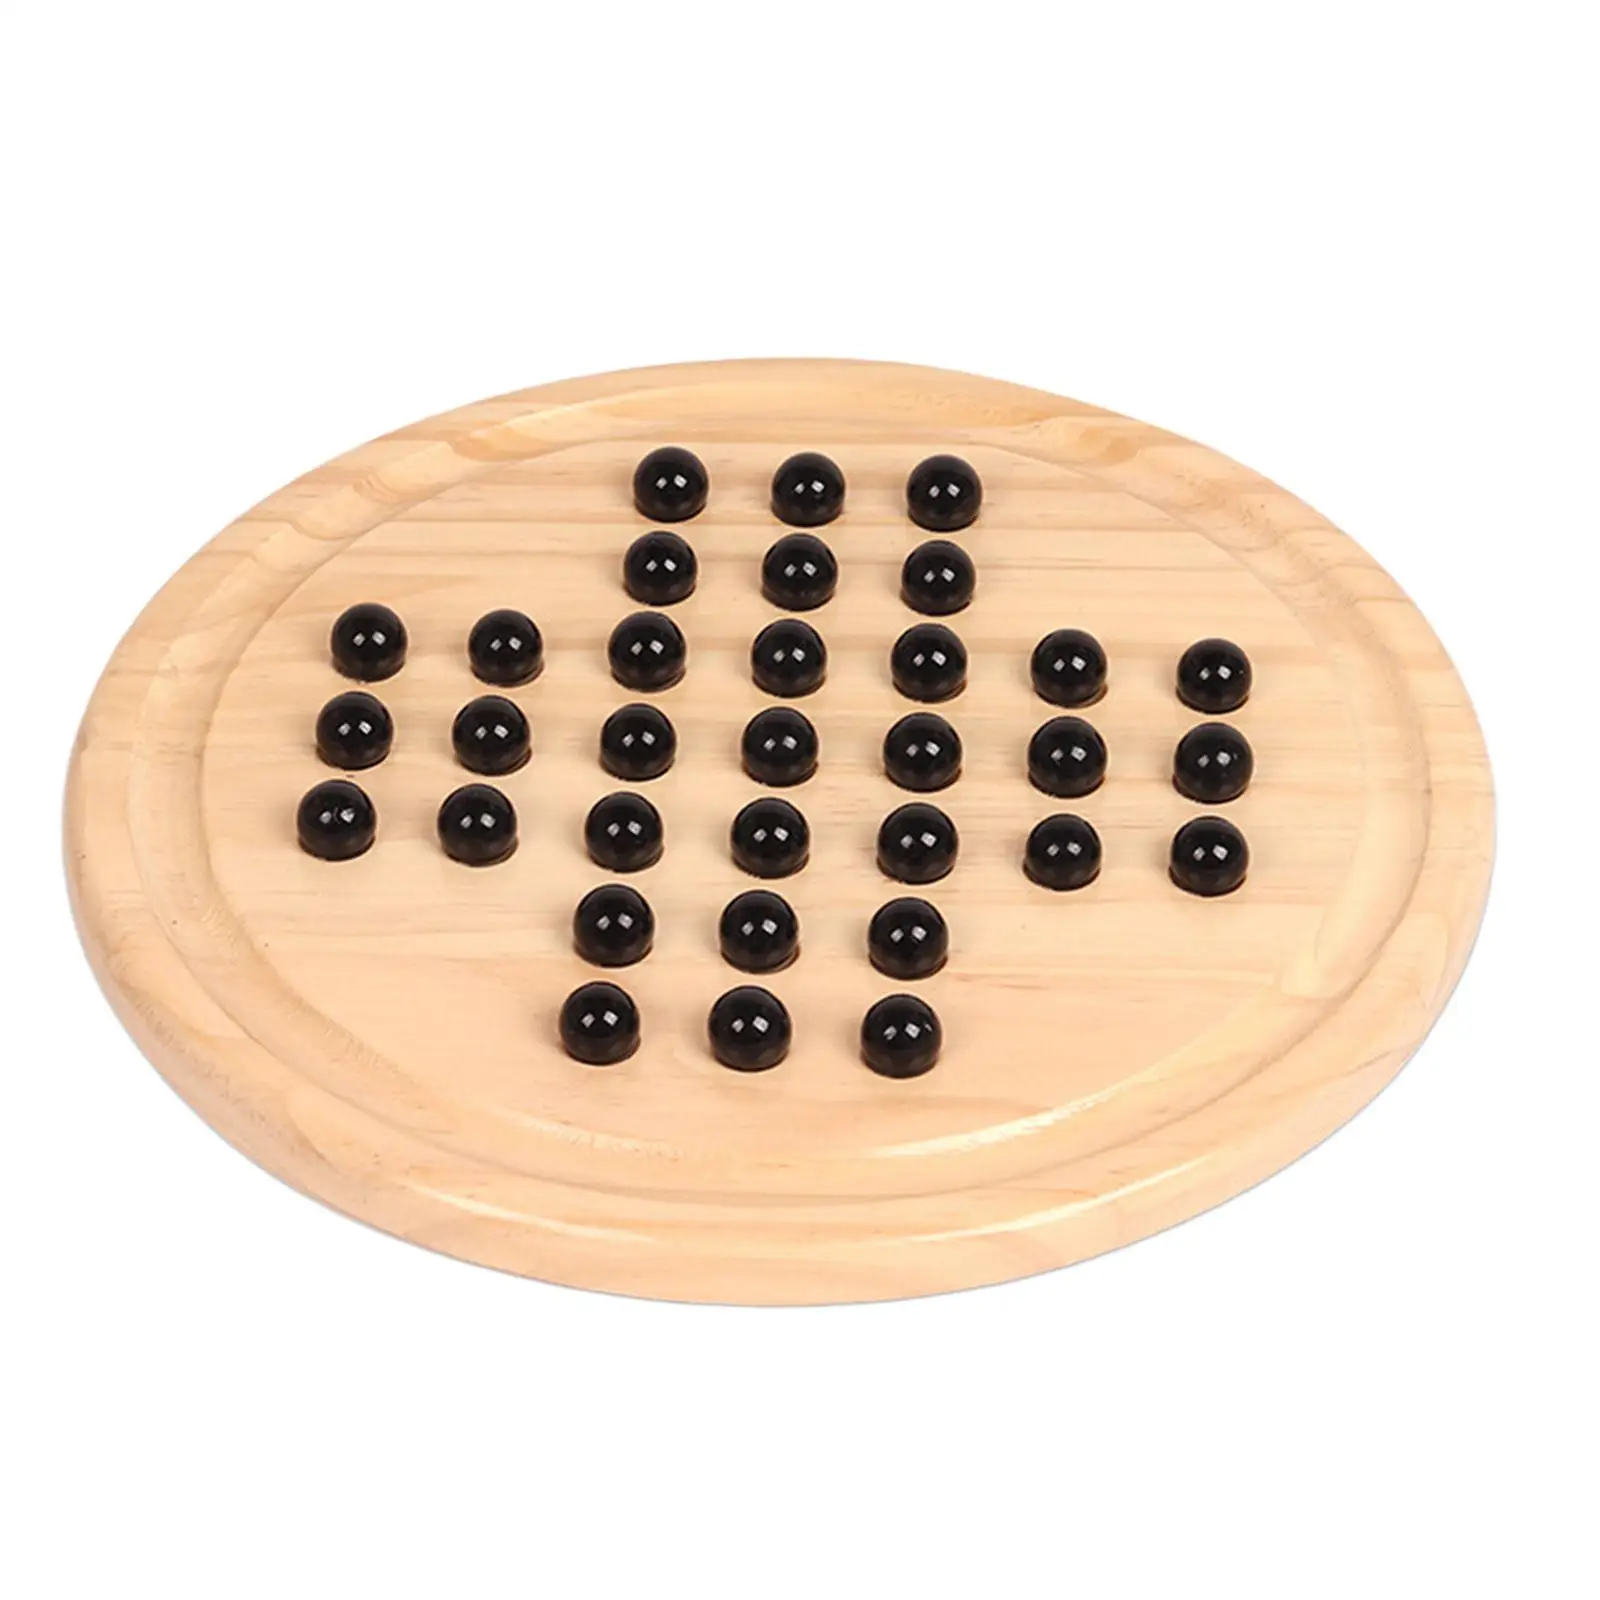 Wooden Peg Solitaire Game With 33 Glass Balls Pegs For Kids - Puzzles - AliExpress